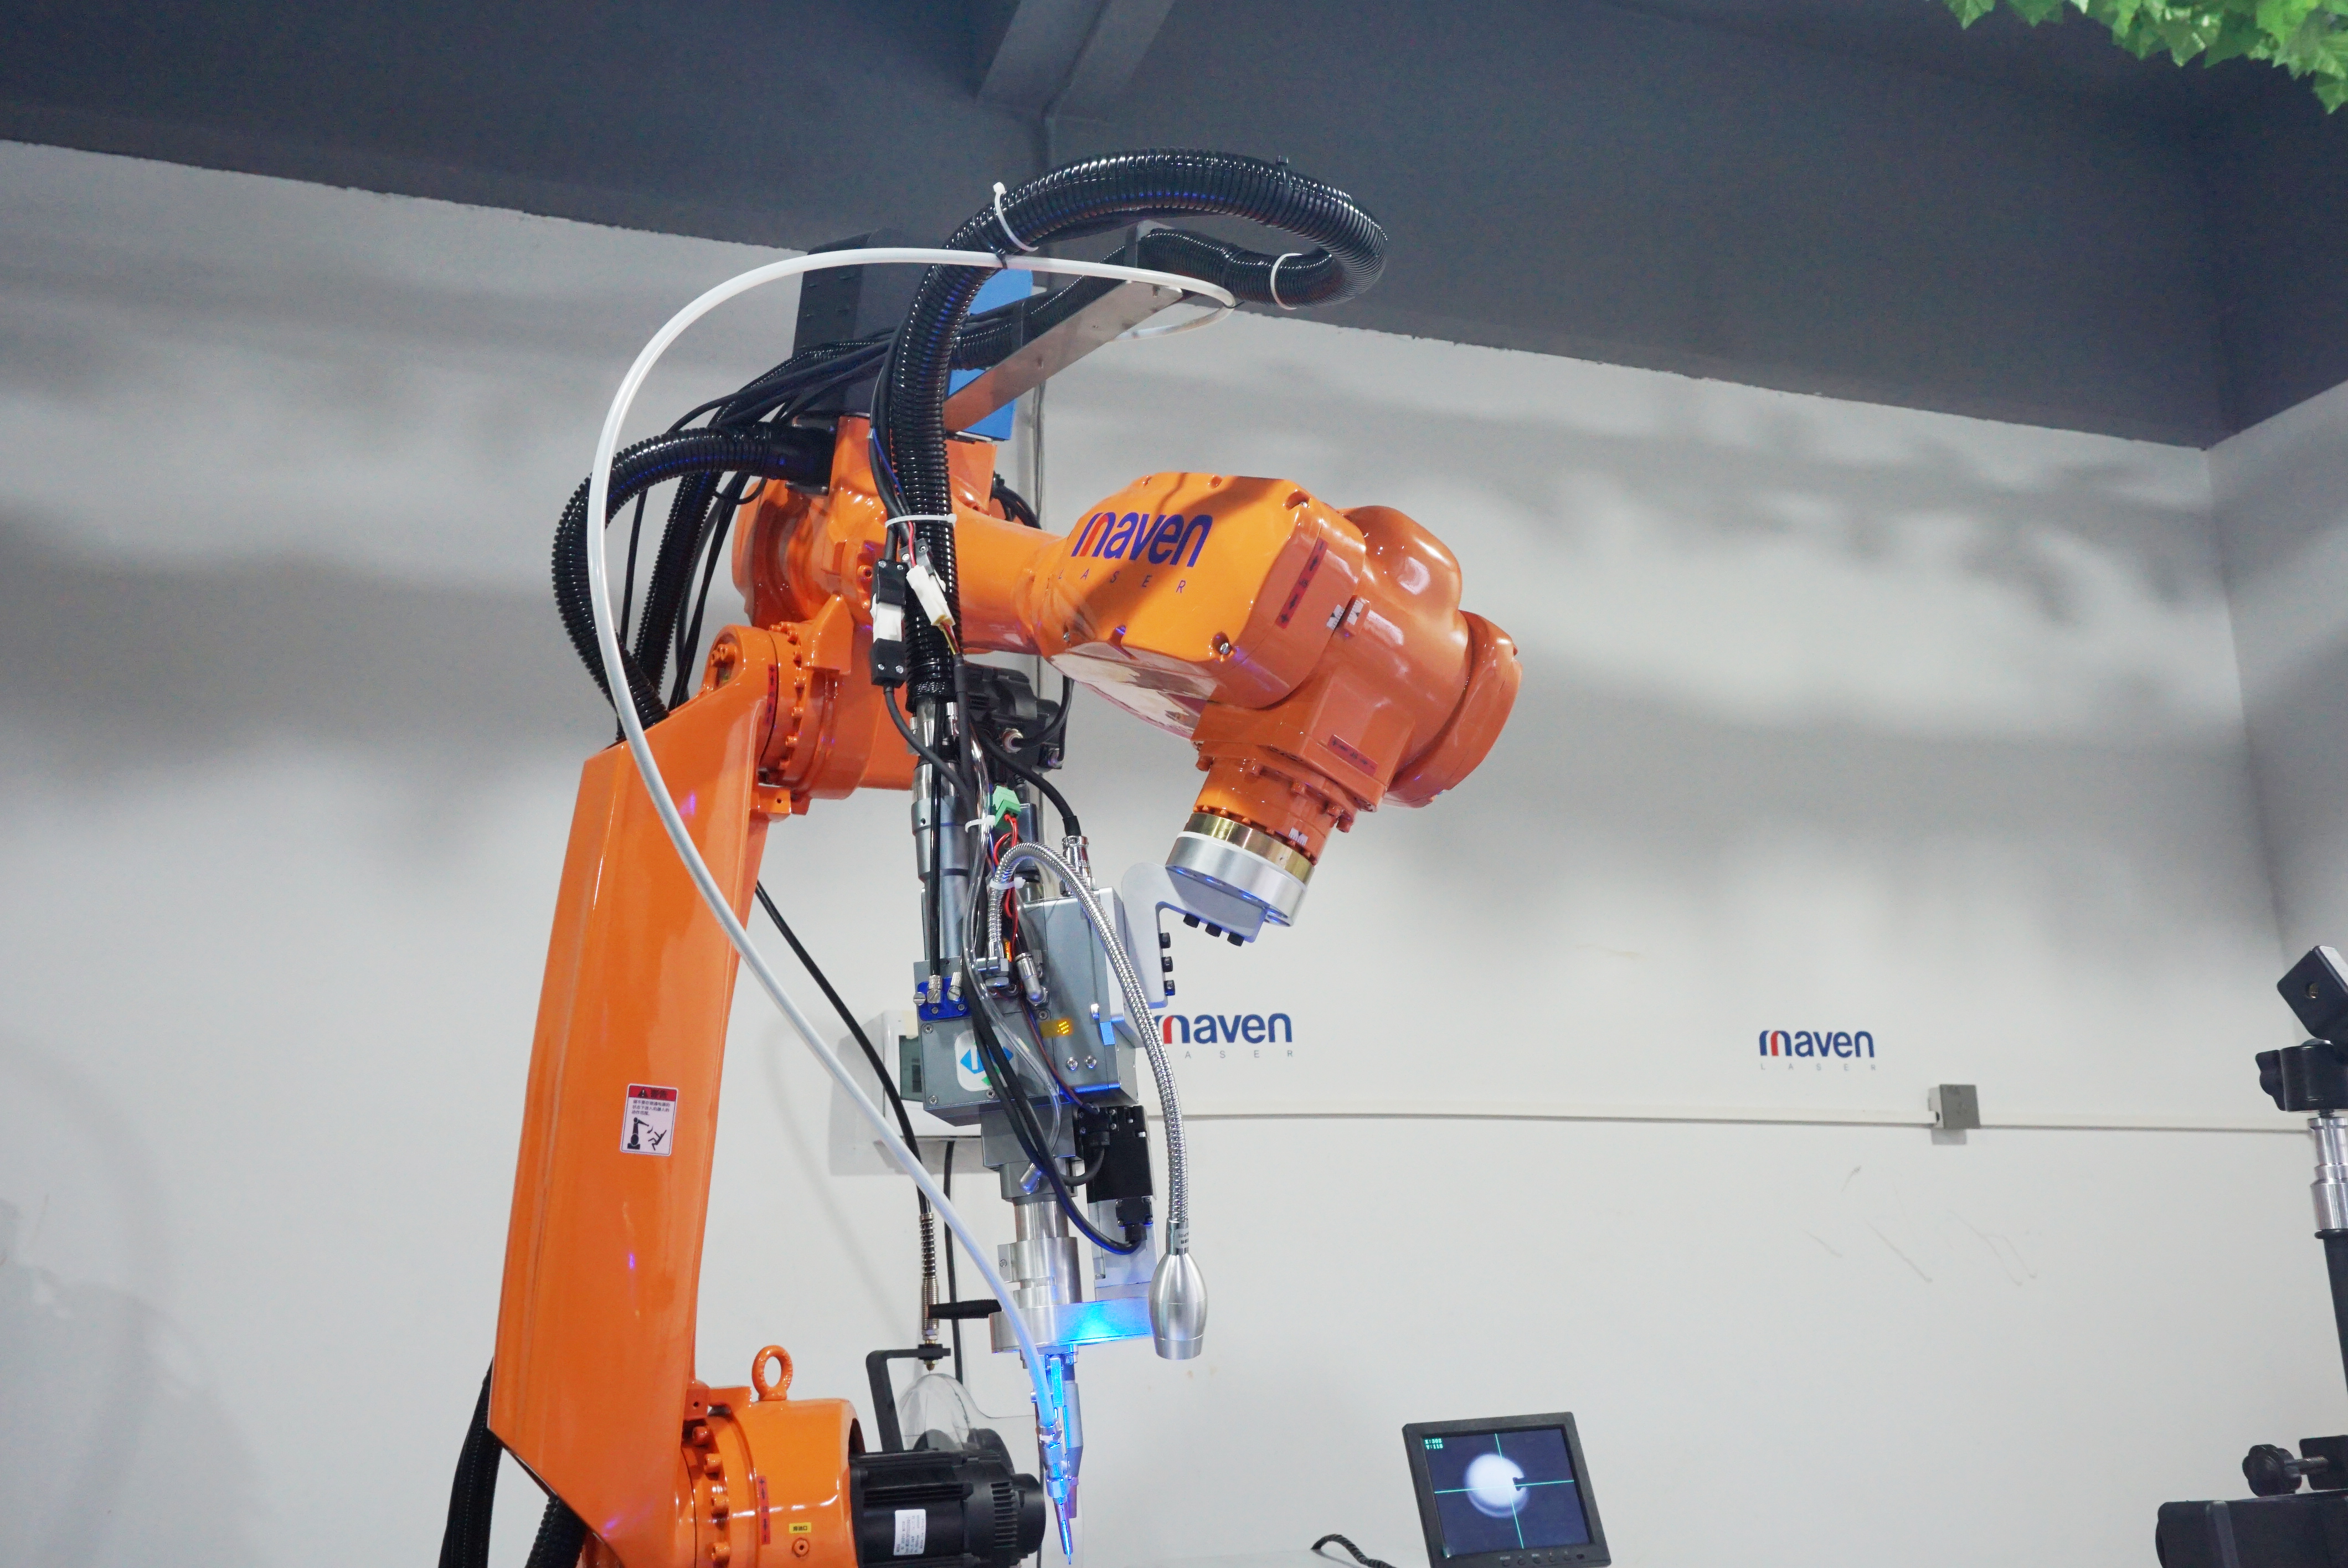 The impact of robotic laser welding technology on current applications in the welding industry